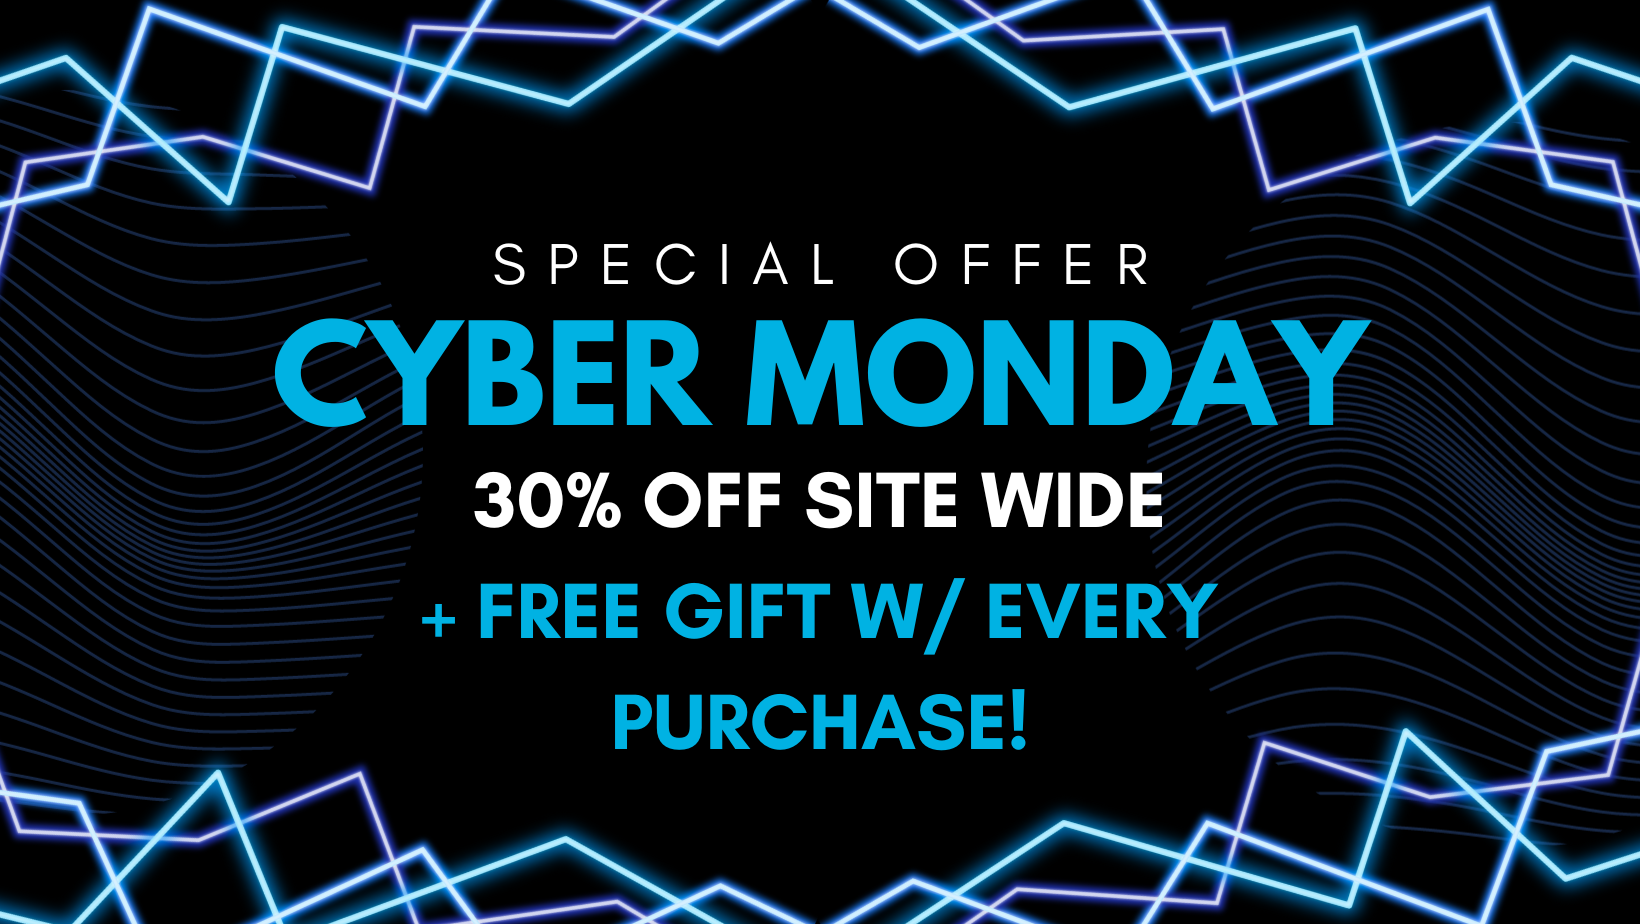 RZ Cyber Monday Sale! 30% Off Site Wide + Free gift with every purchase!